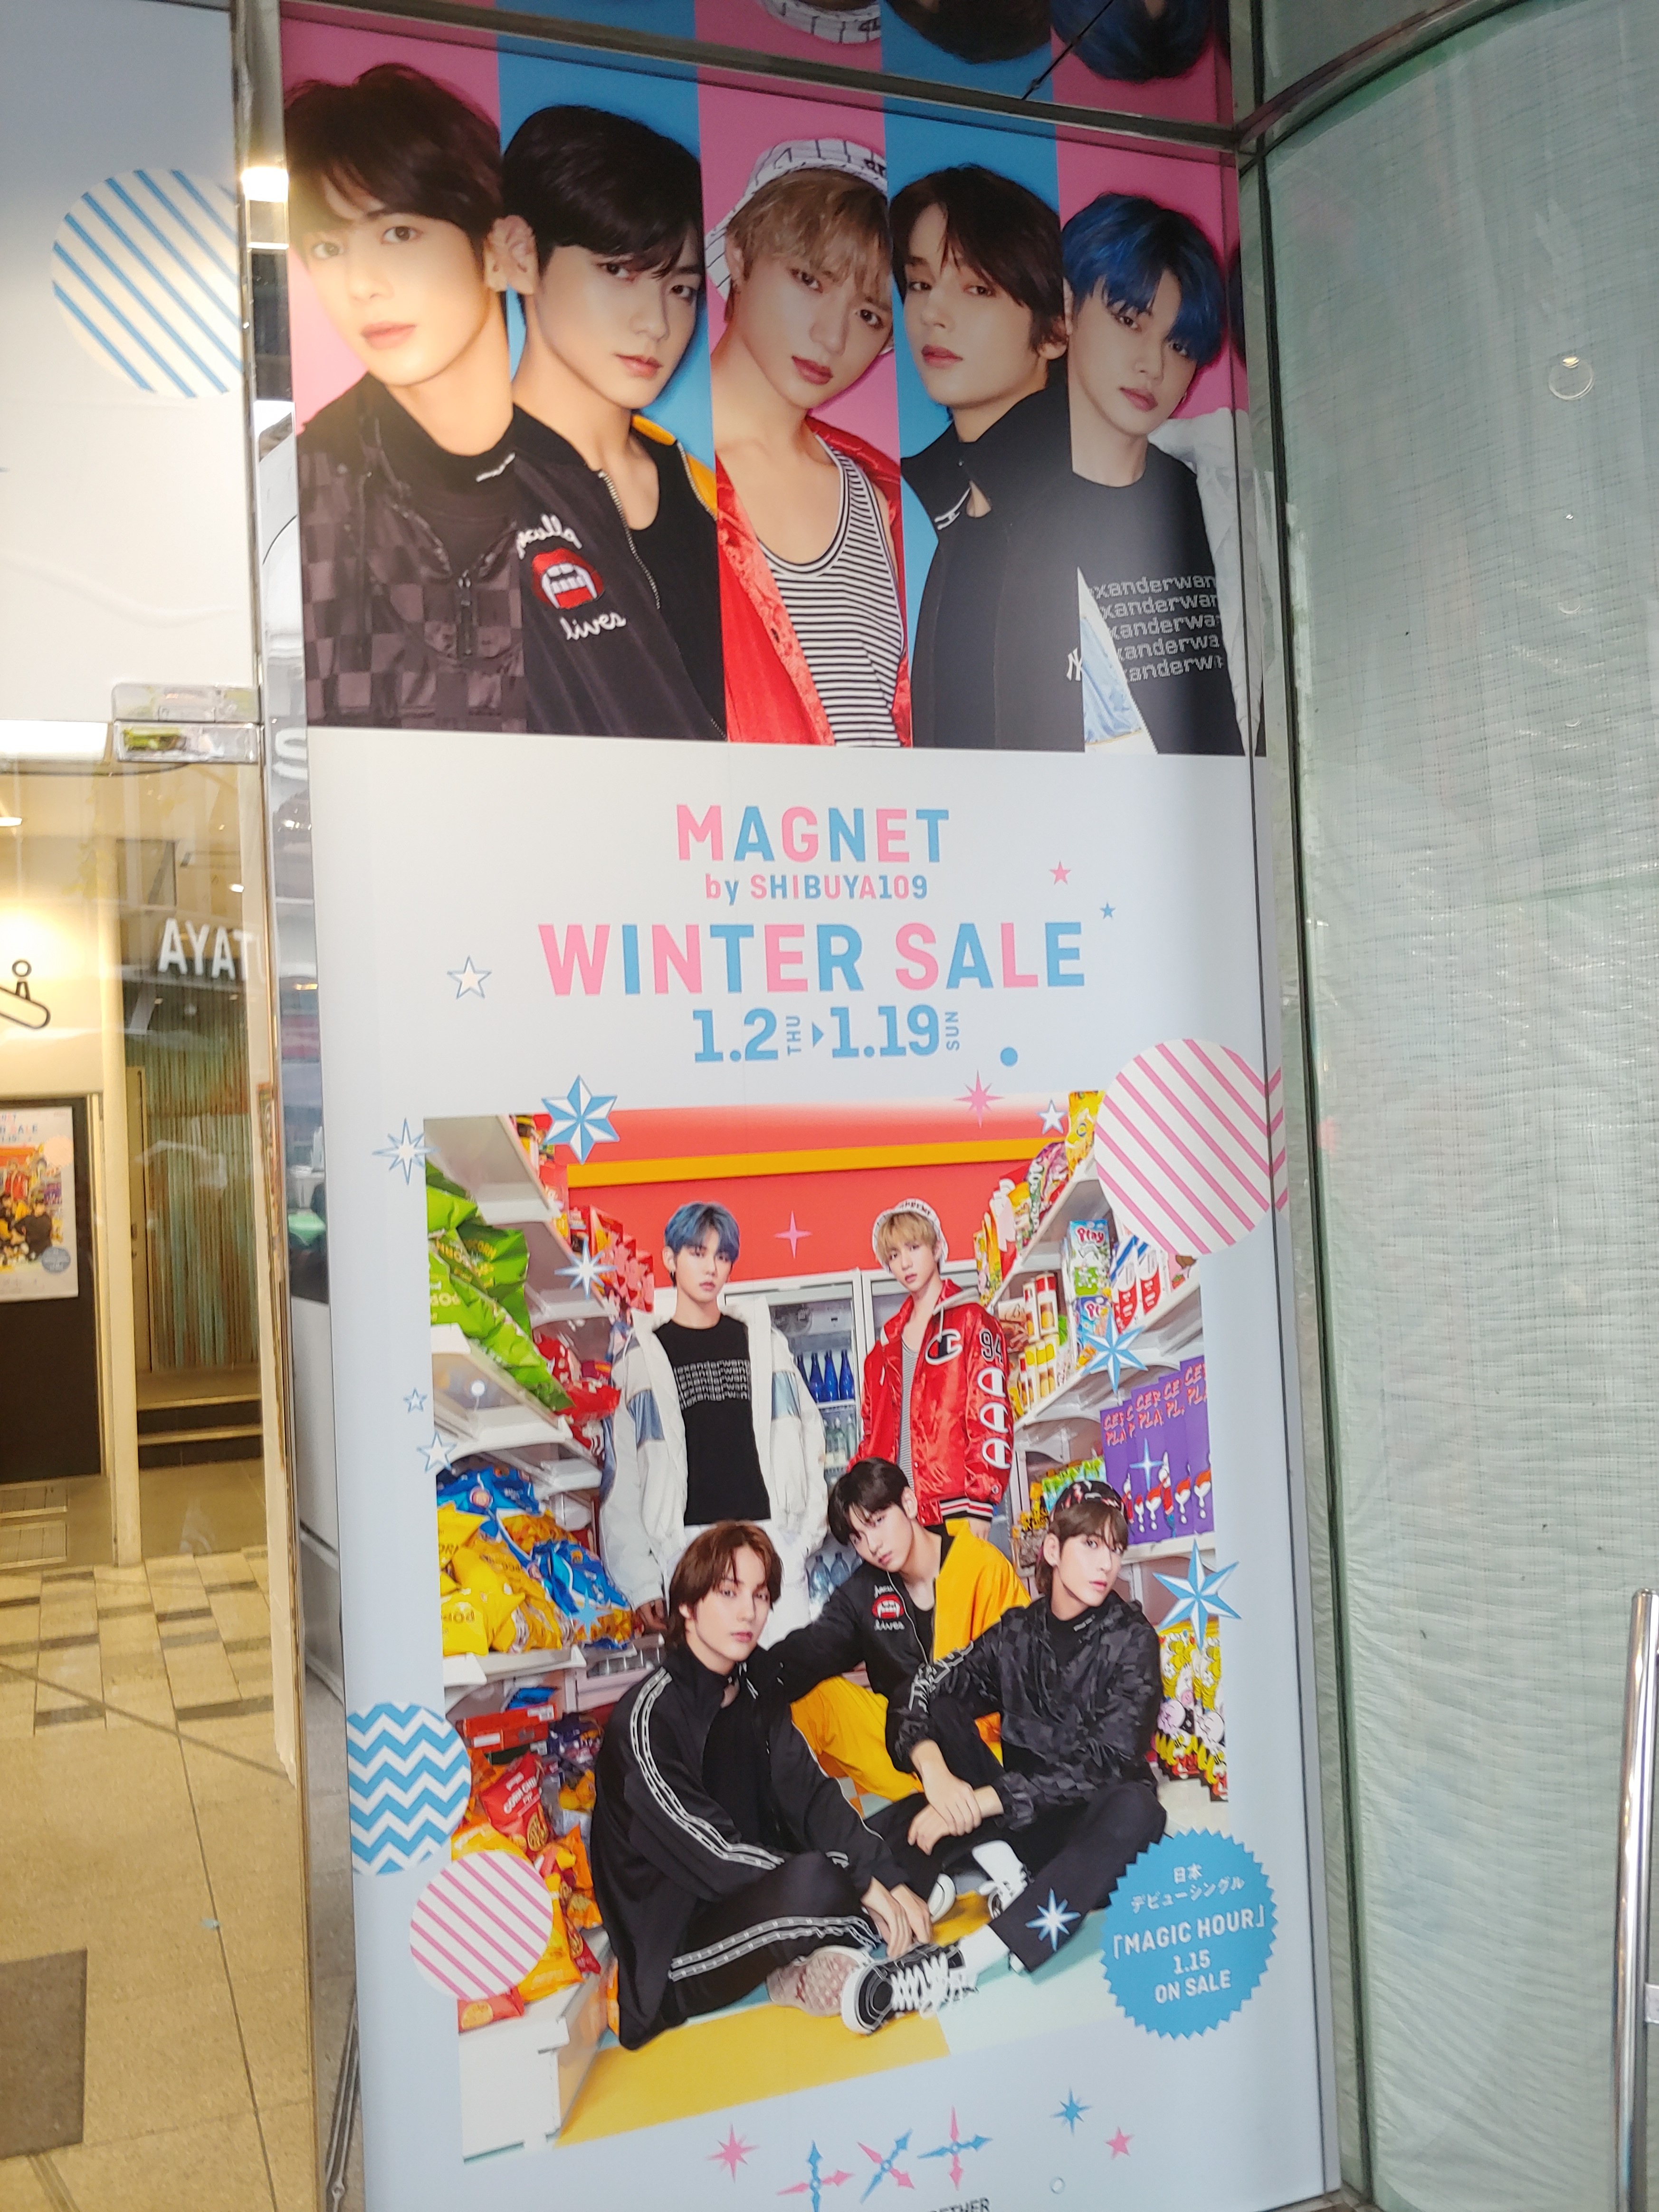 A poster featuring the headshots of 5 K-Pop band members above the words Magnet by Shibuya109 Winter Sale, 1.2 Thu to 1.19 Sun. Below this is a group shot of the band posing together.